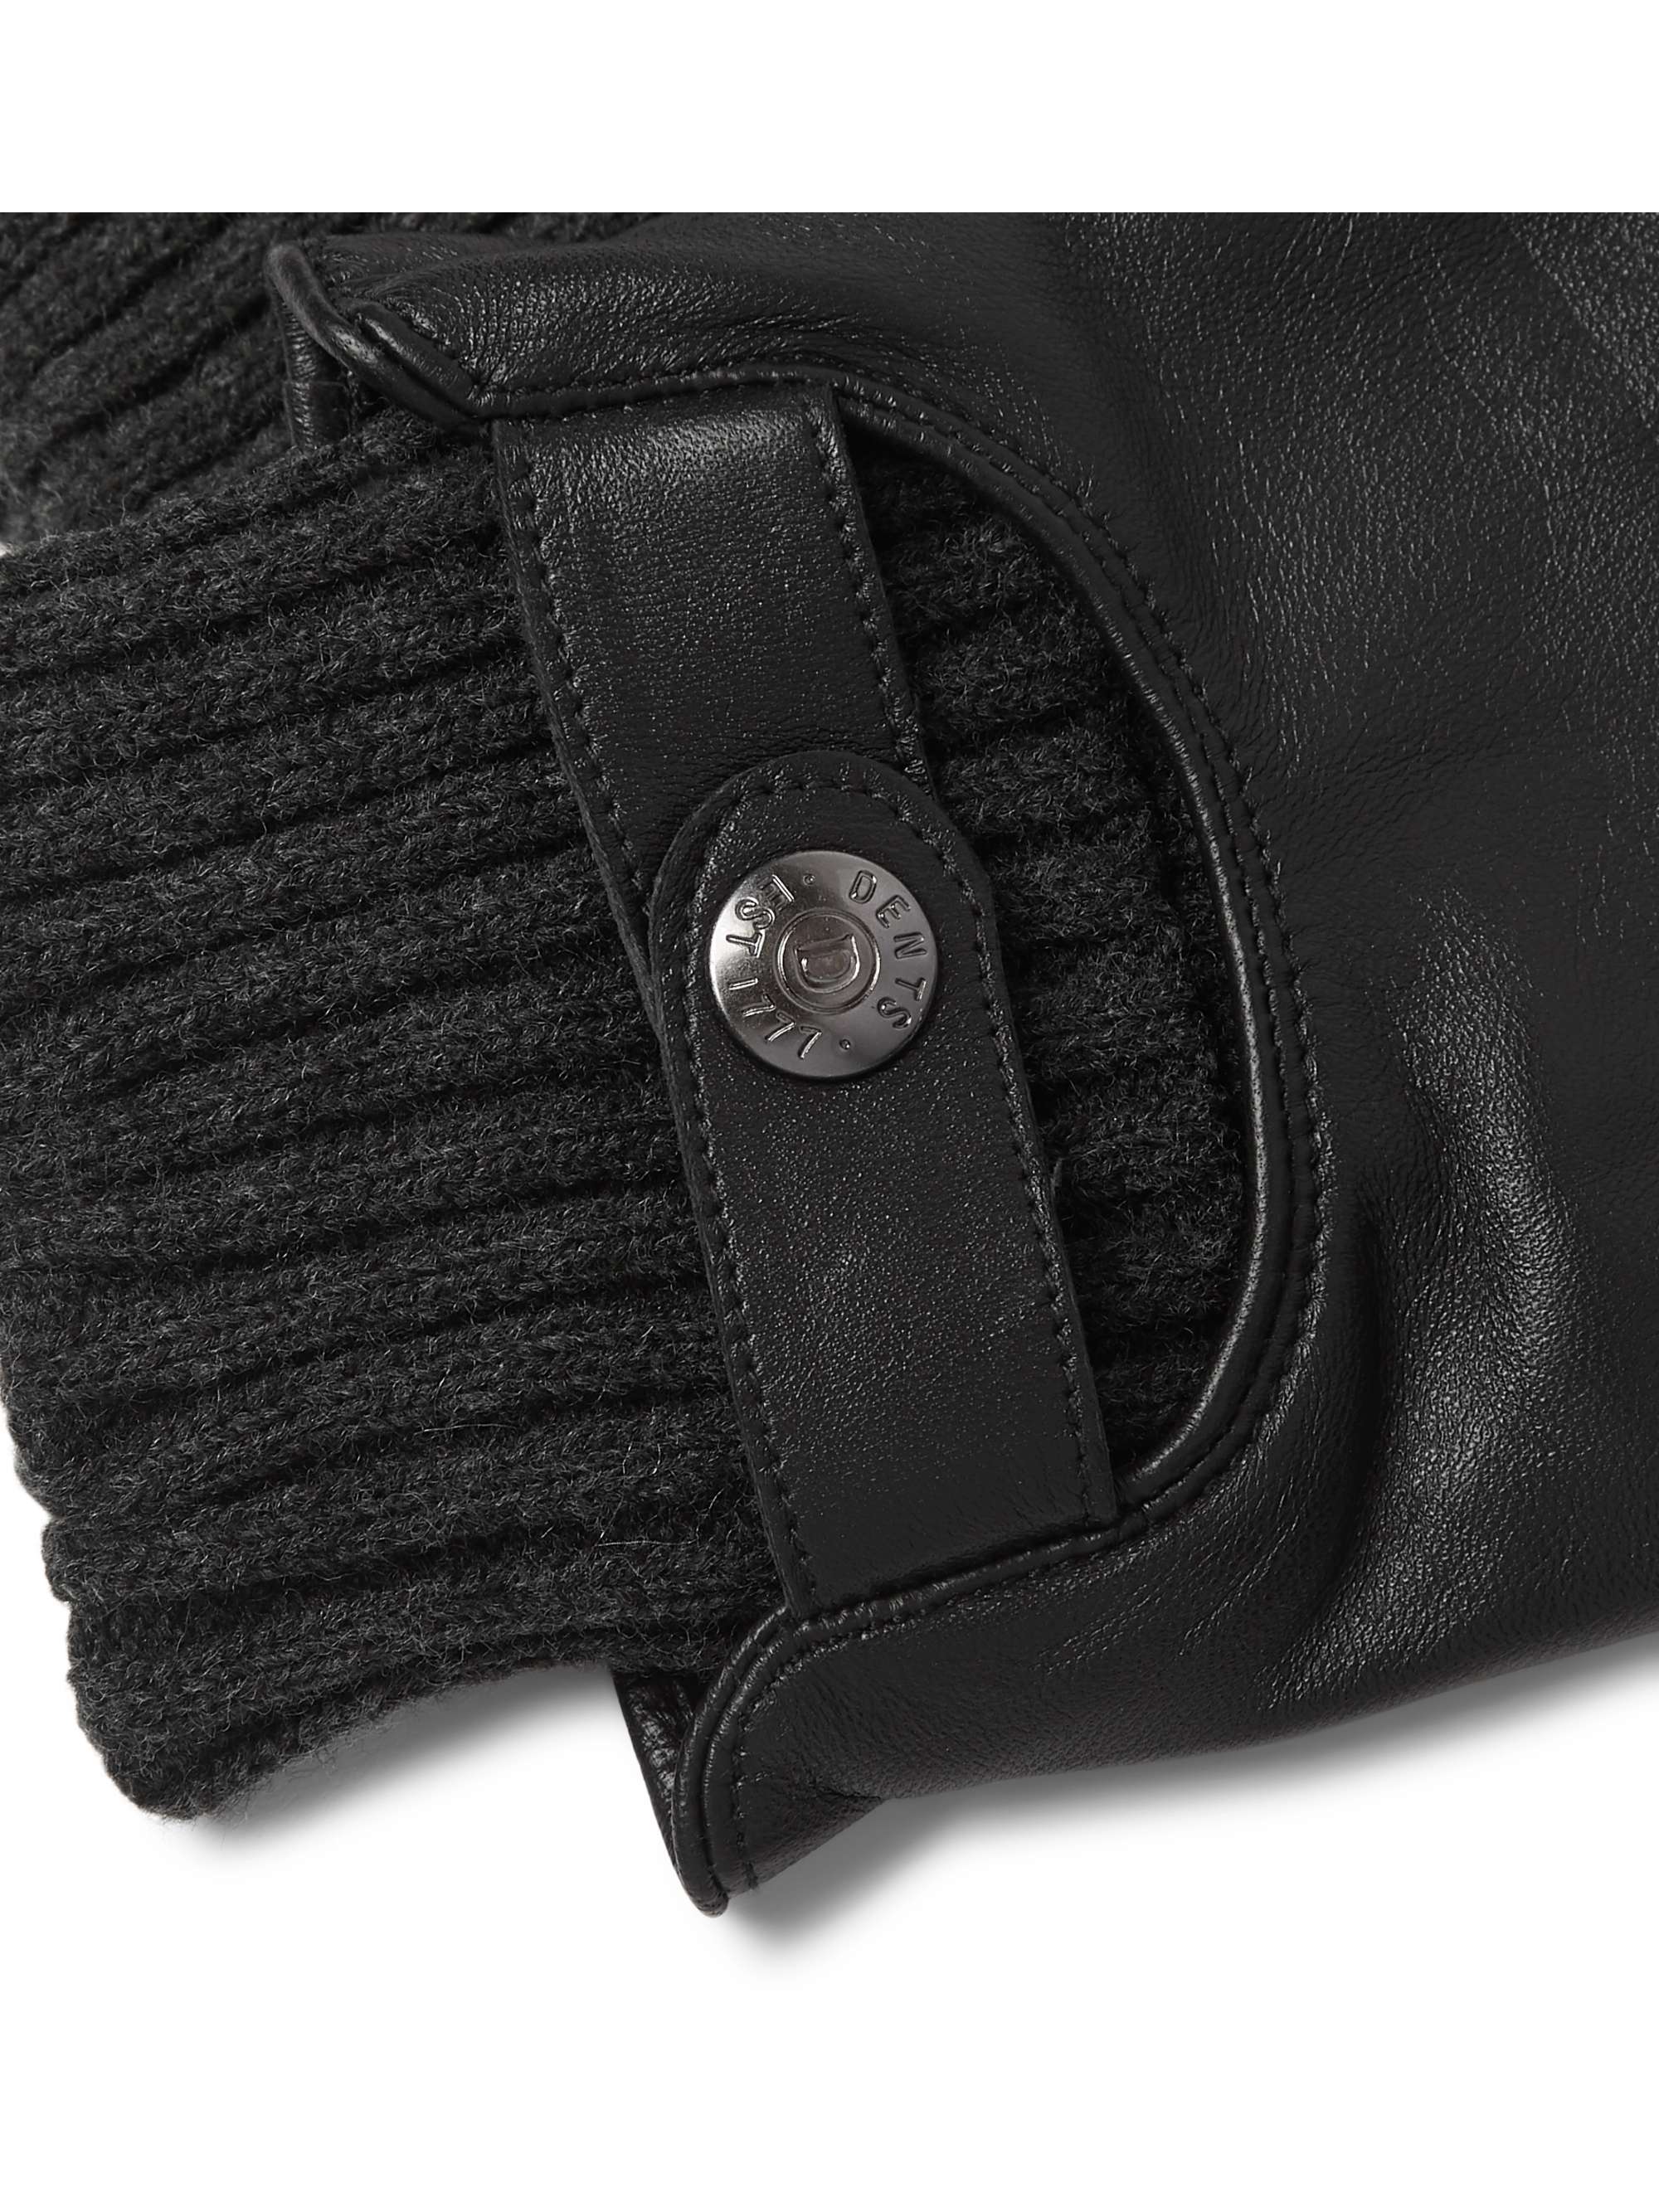 DENTS Buxton Touchscreen Leather Gloves